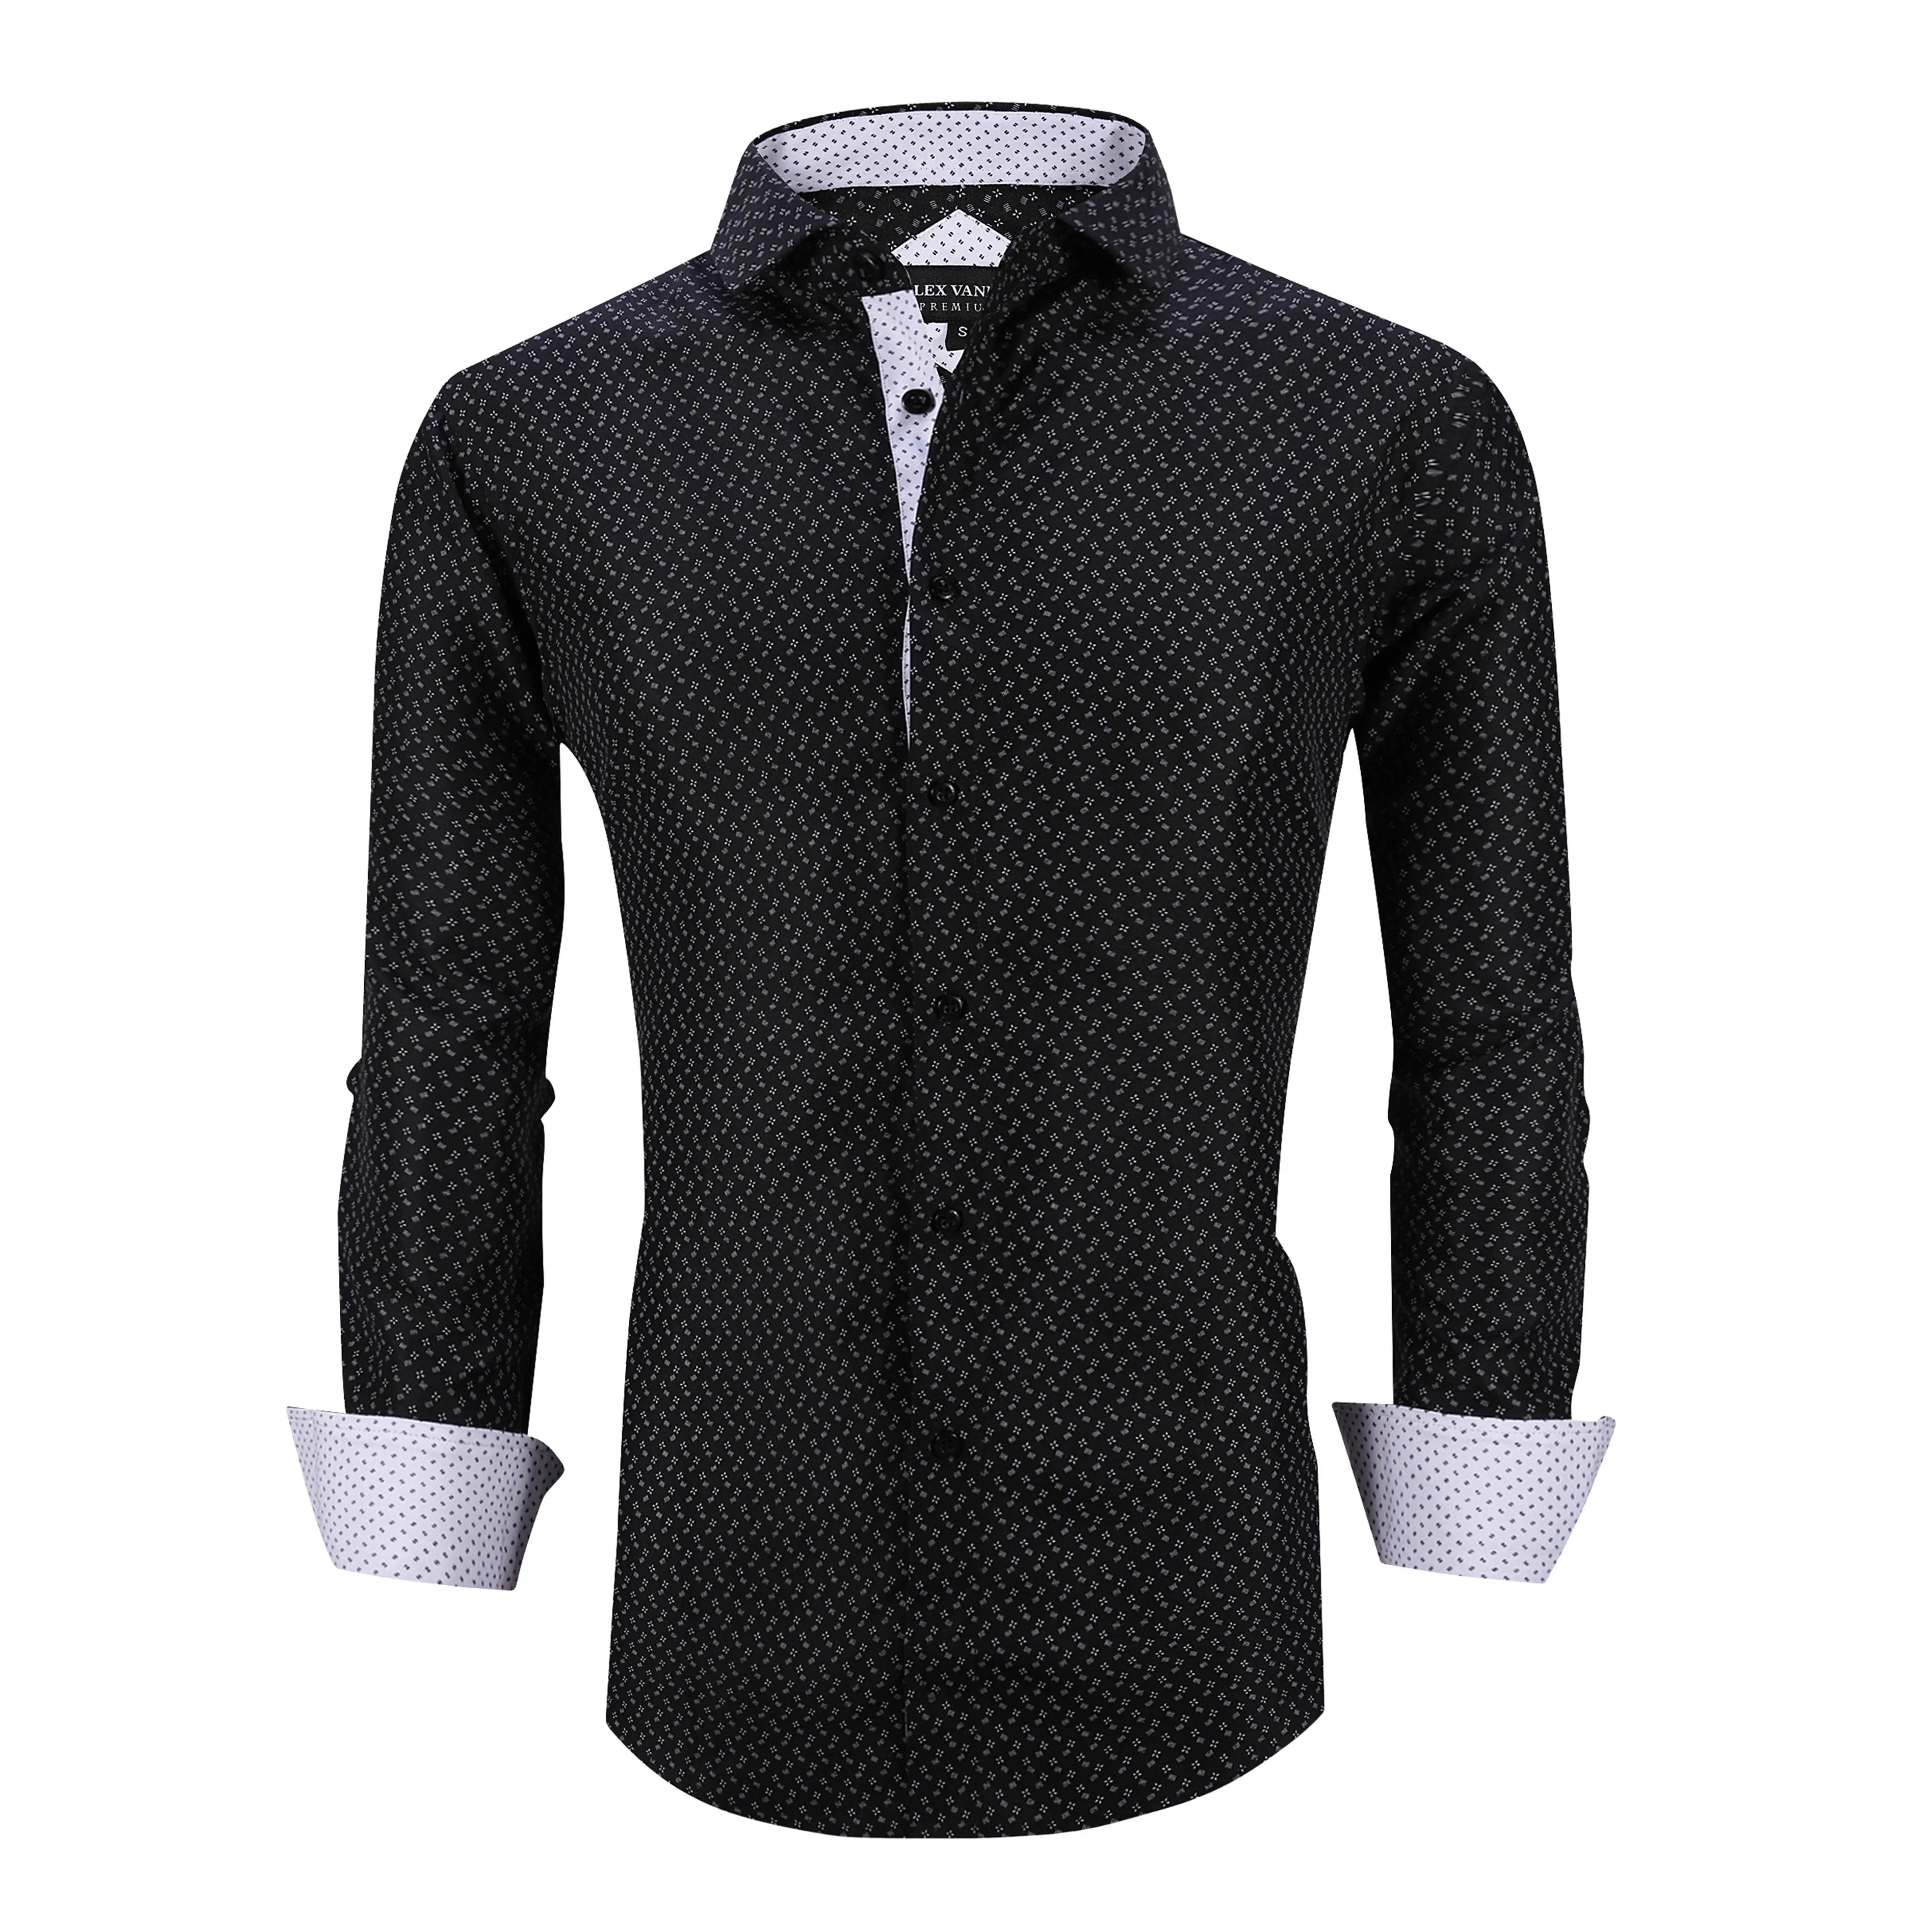 2022 new Men's clothing spring and autumn new business slim long sleeve shirt fashion cross printed casual shirts plus size